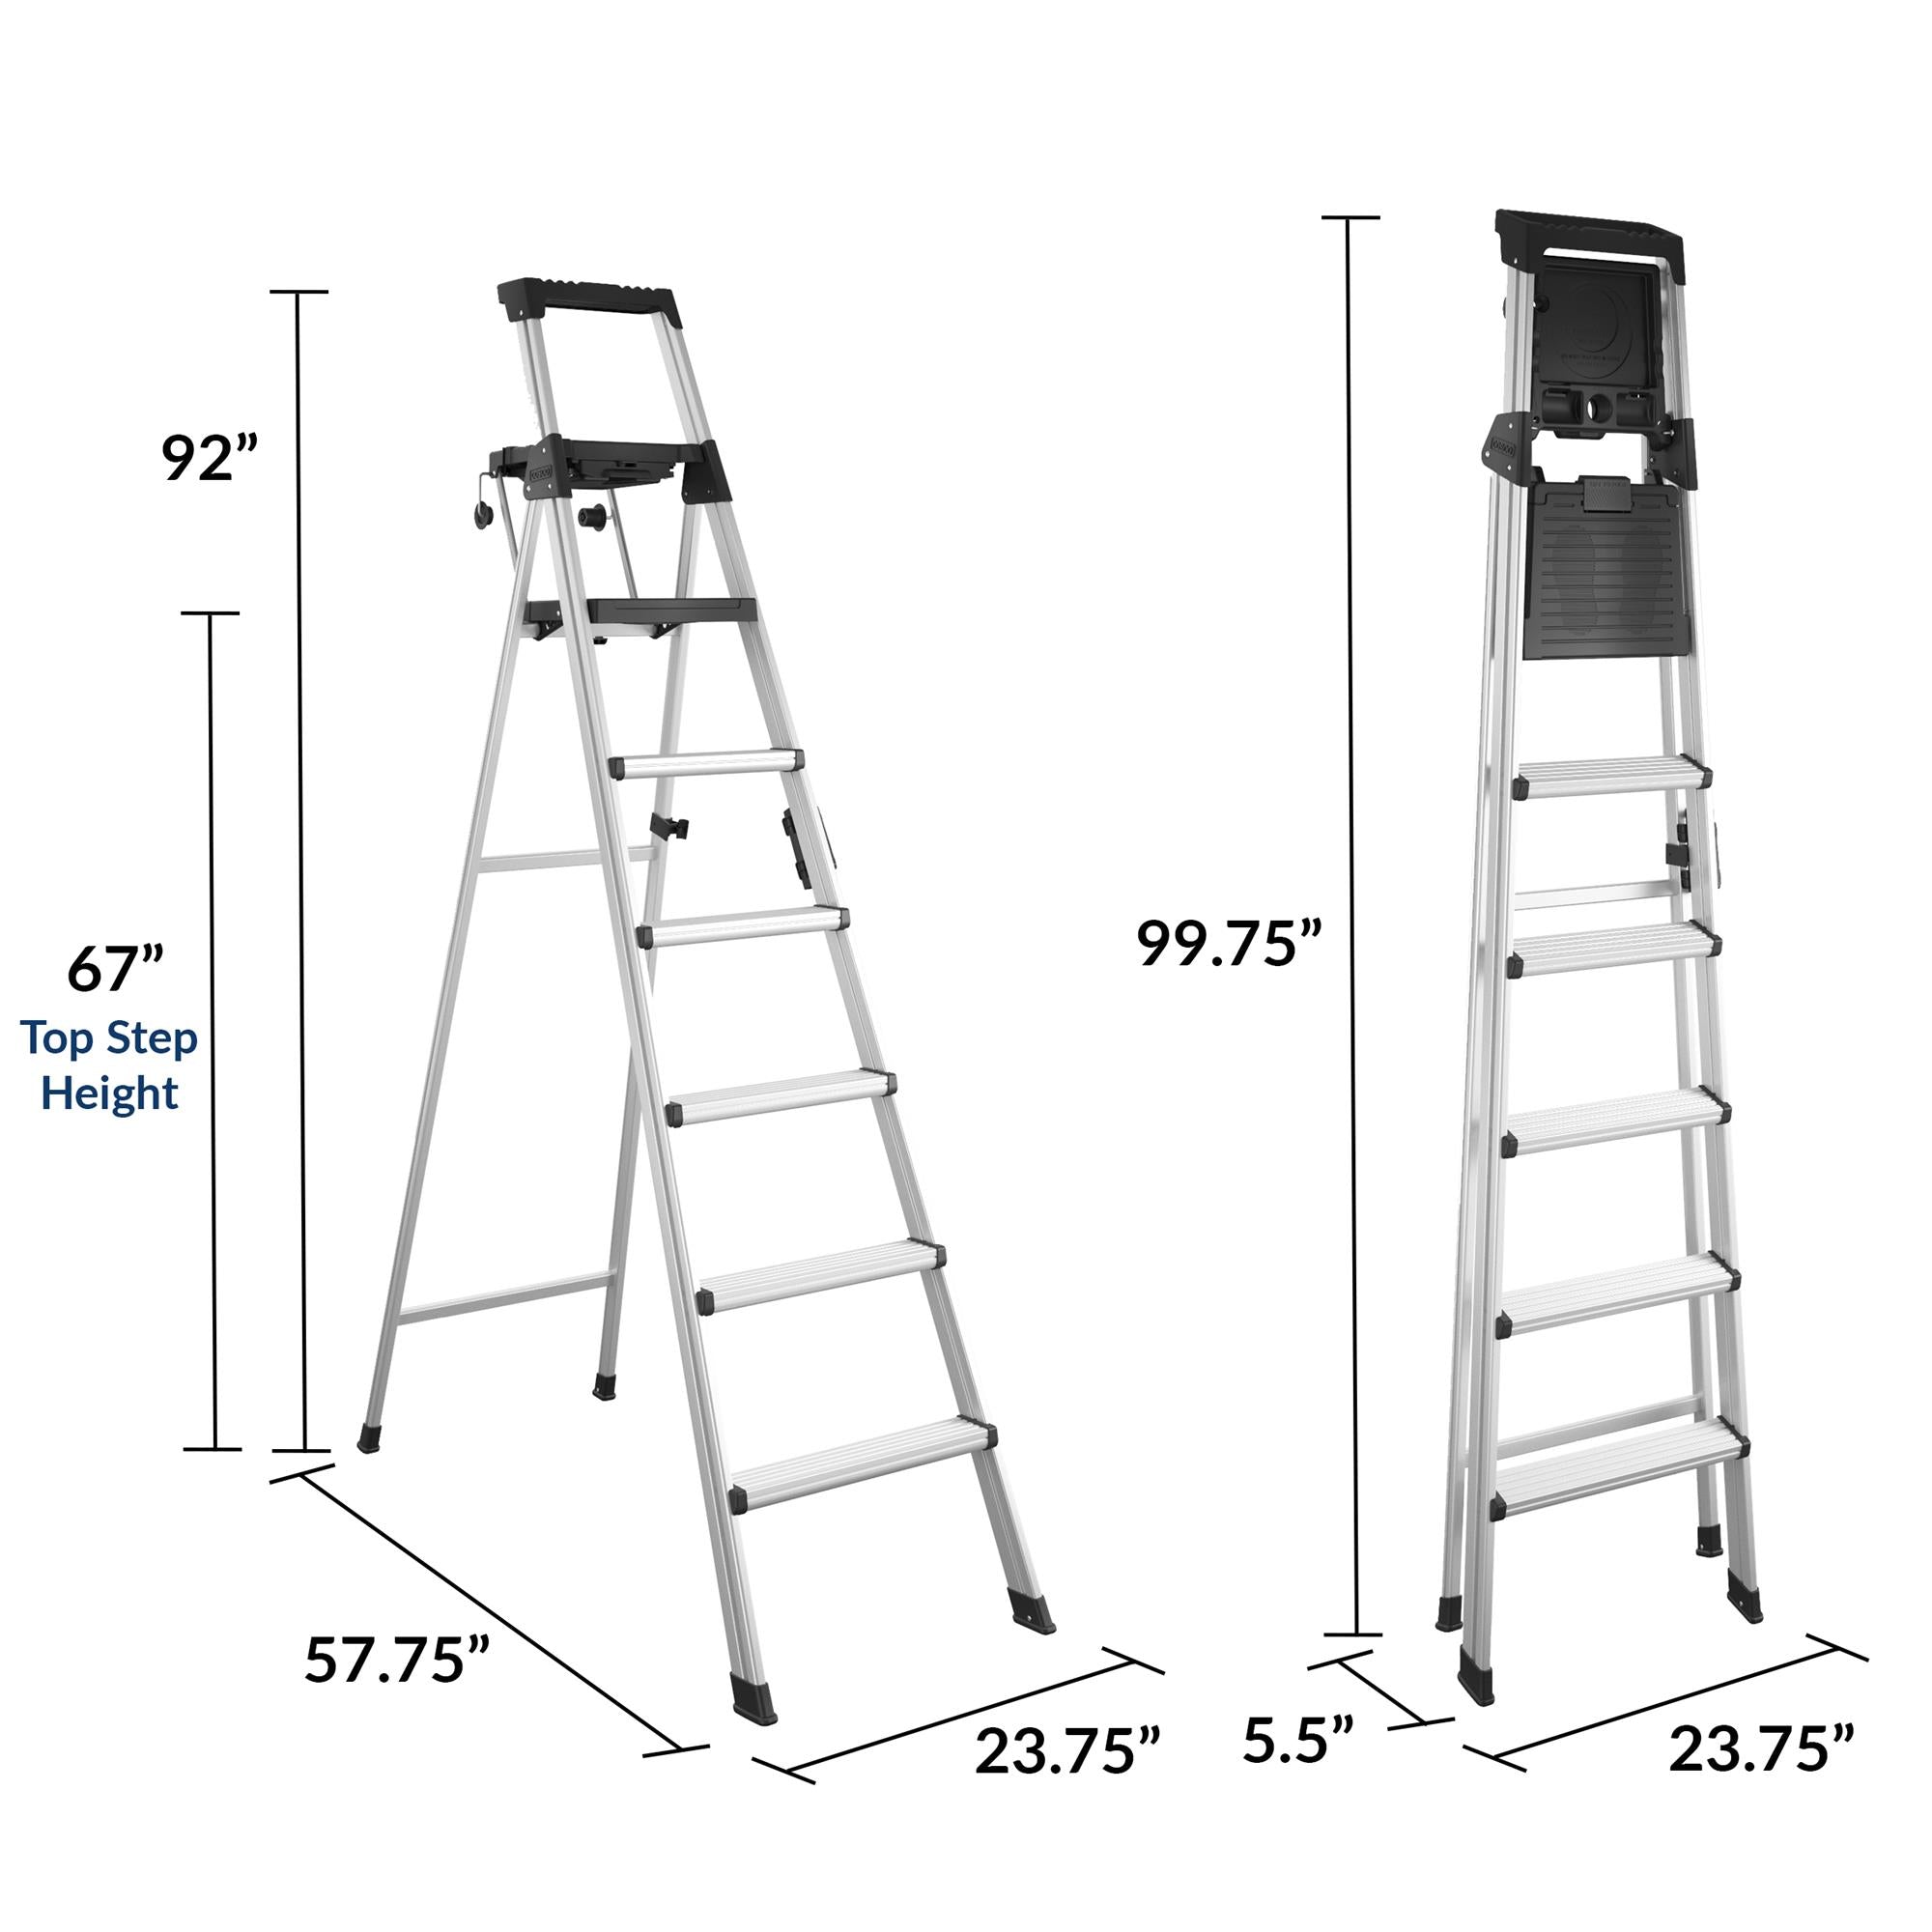 8-foot Signature Series Step Ladder - Aluminum/Black - 3 Step with Tray